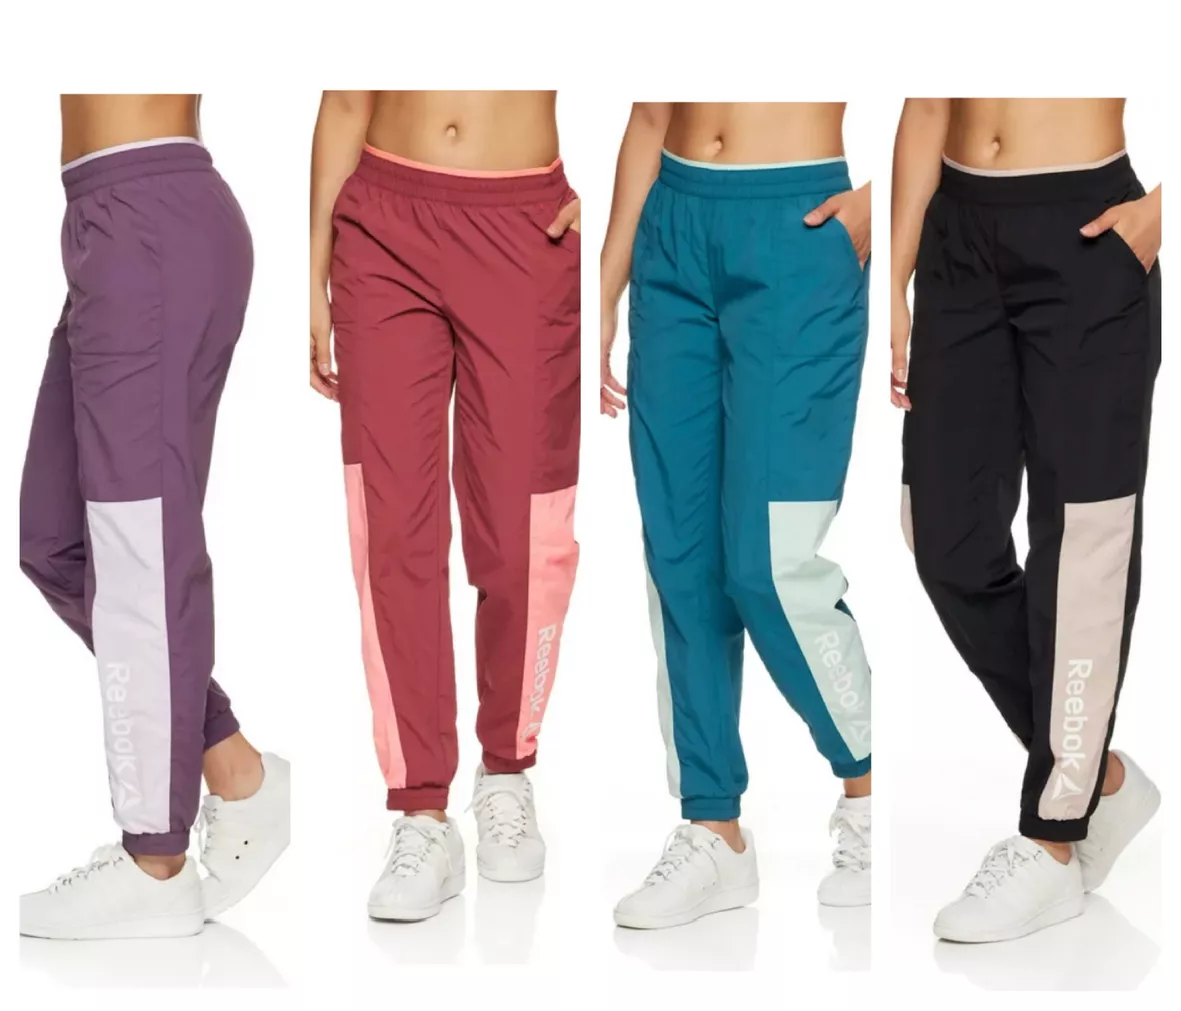 Reebok Women's Focus Track Woven Pants with Front Pockets and Back